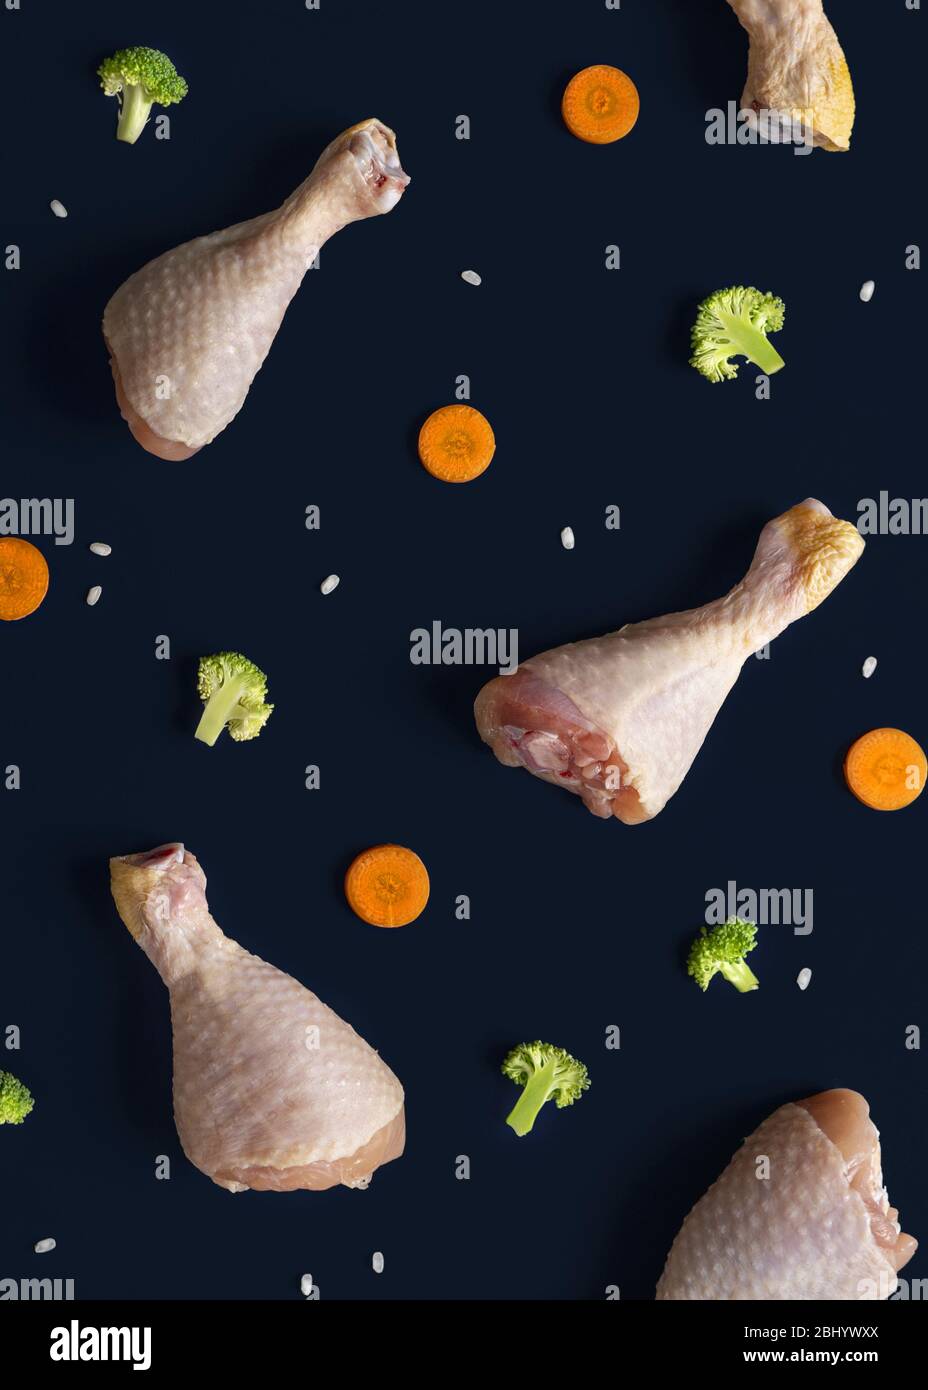 Concept of diet food. Flat lay composition pattern of chicken thigh, broccoli, carrots and rice grains Stock Photo